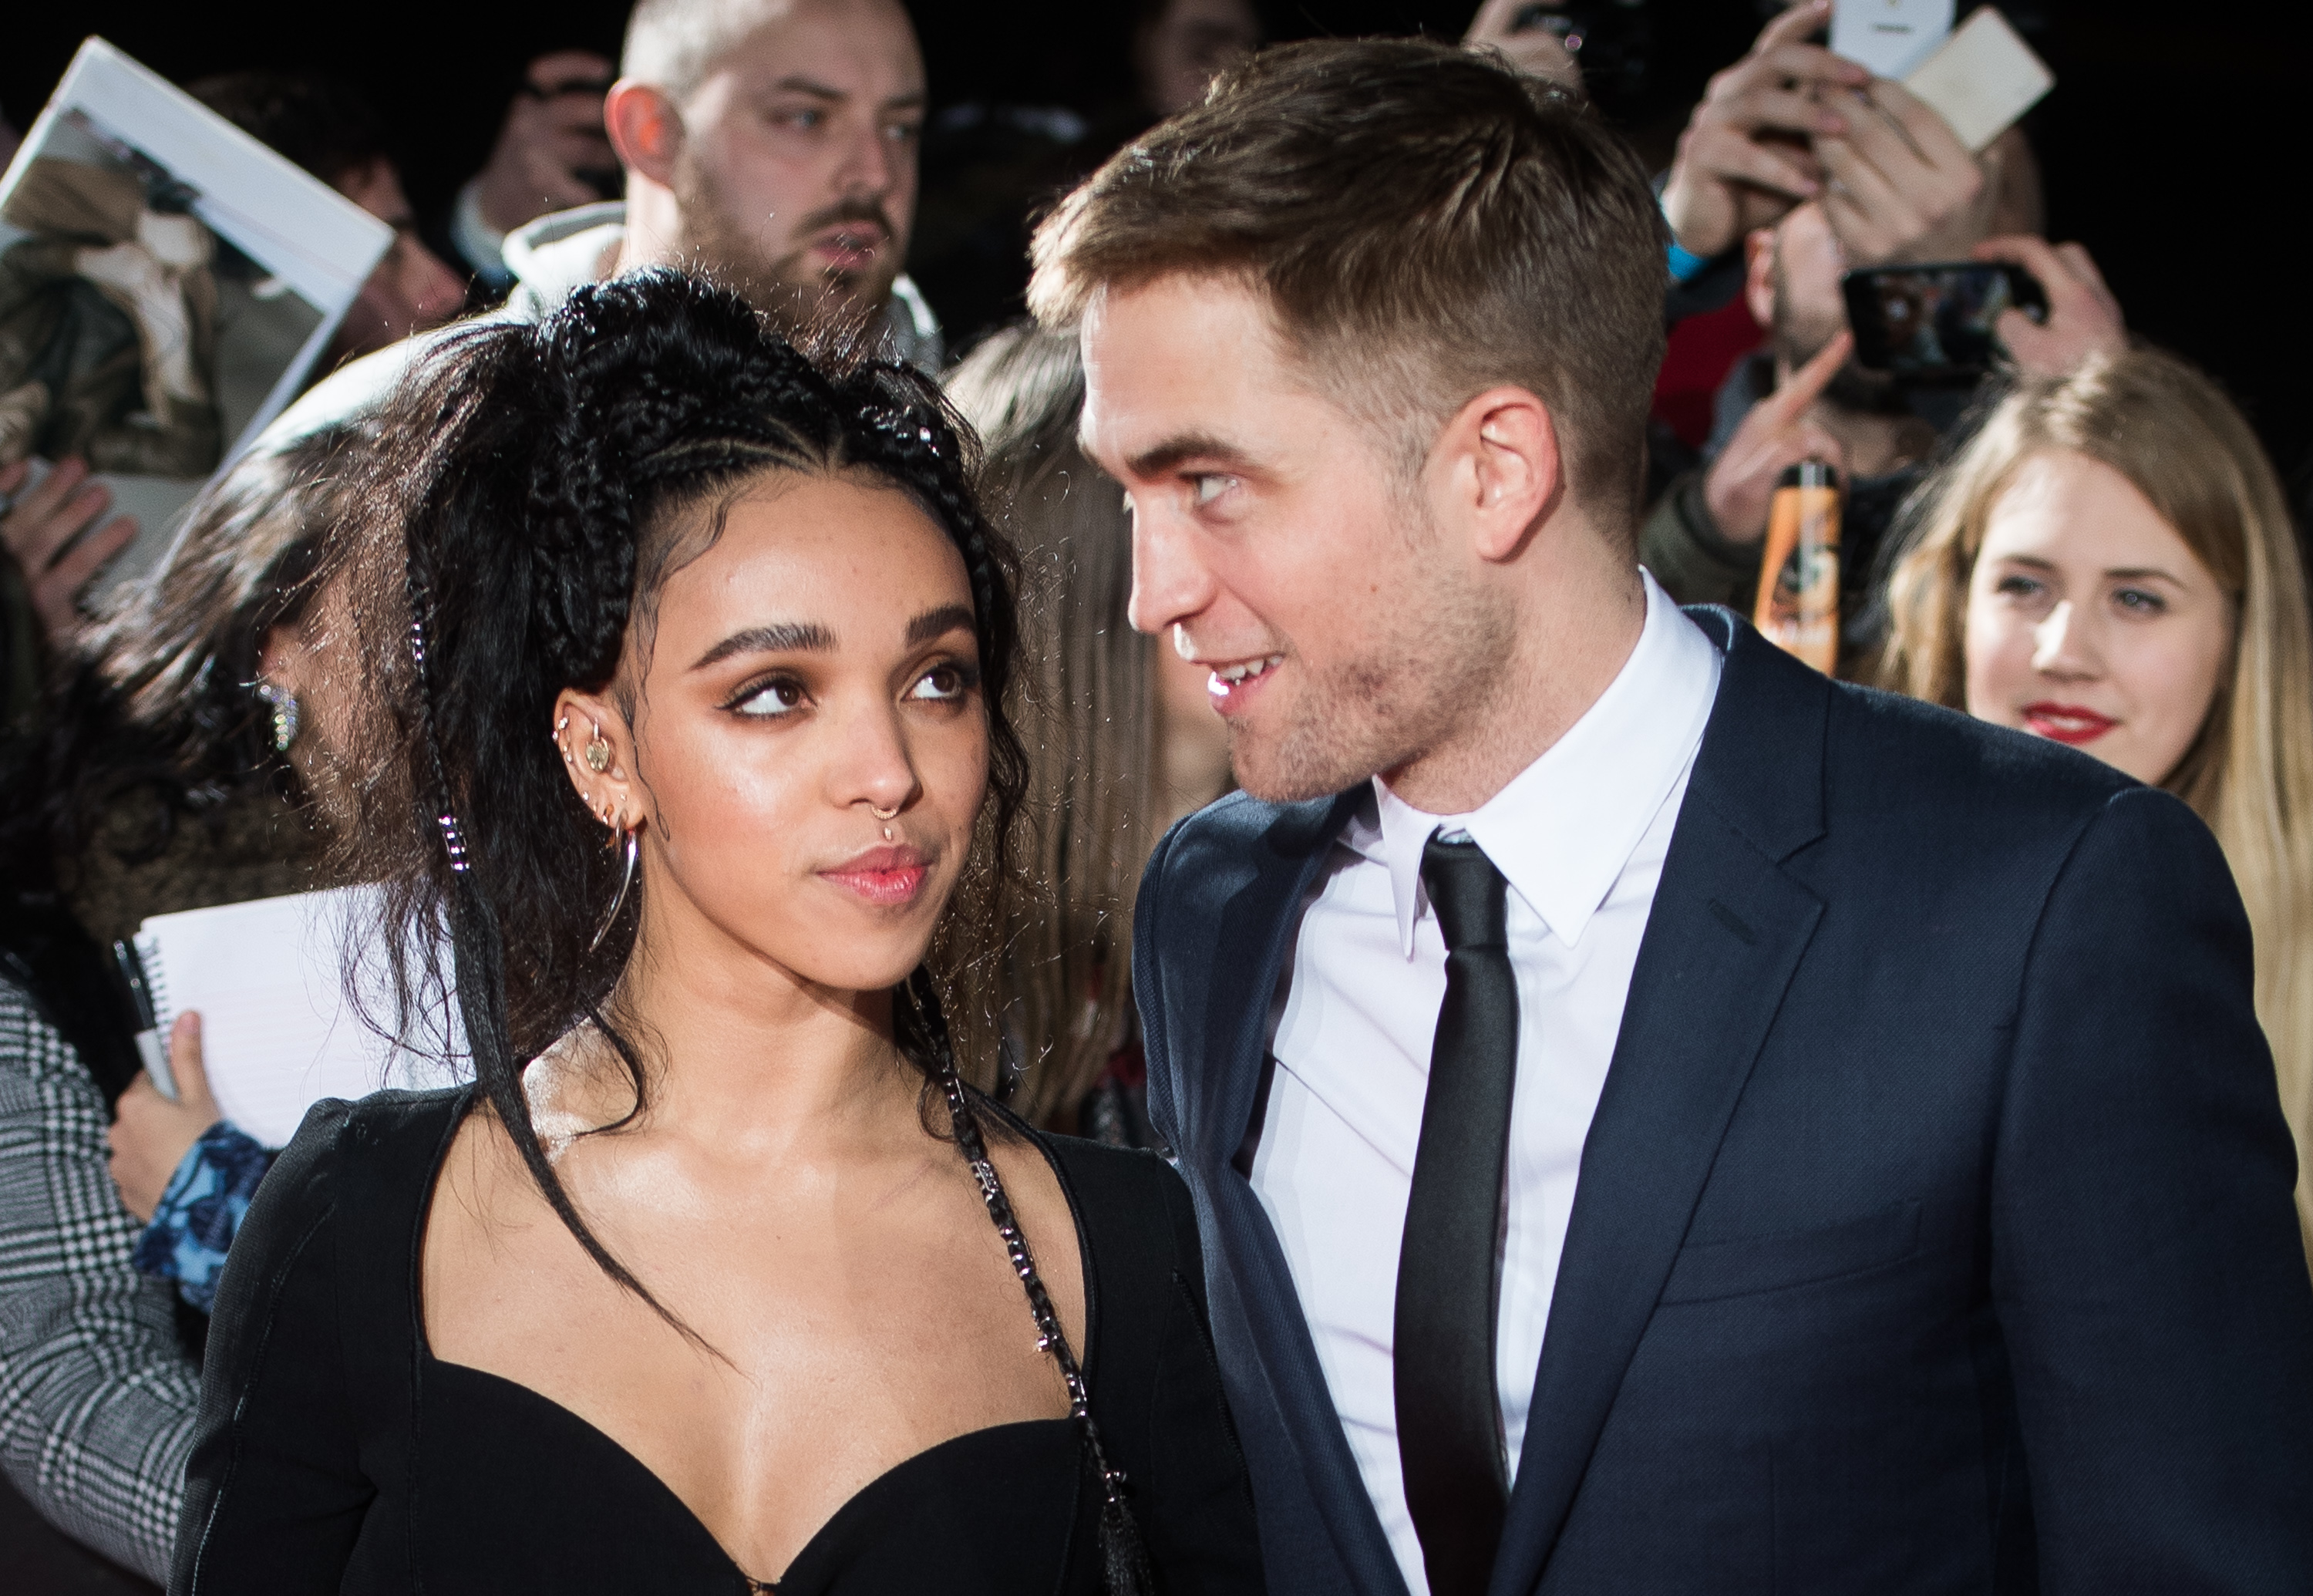 Close-up of FKA Twigs looking at Robert at a media event